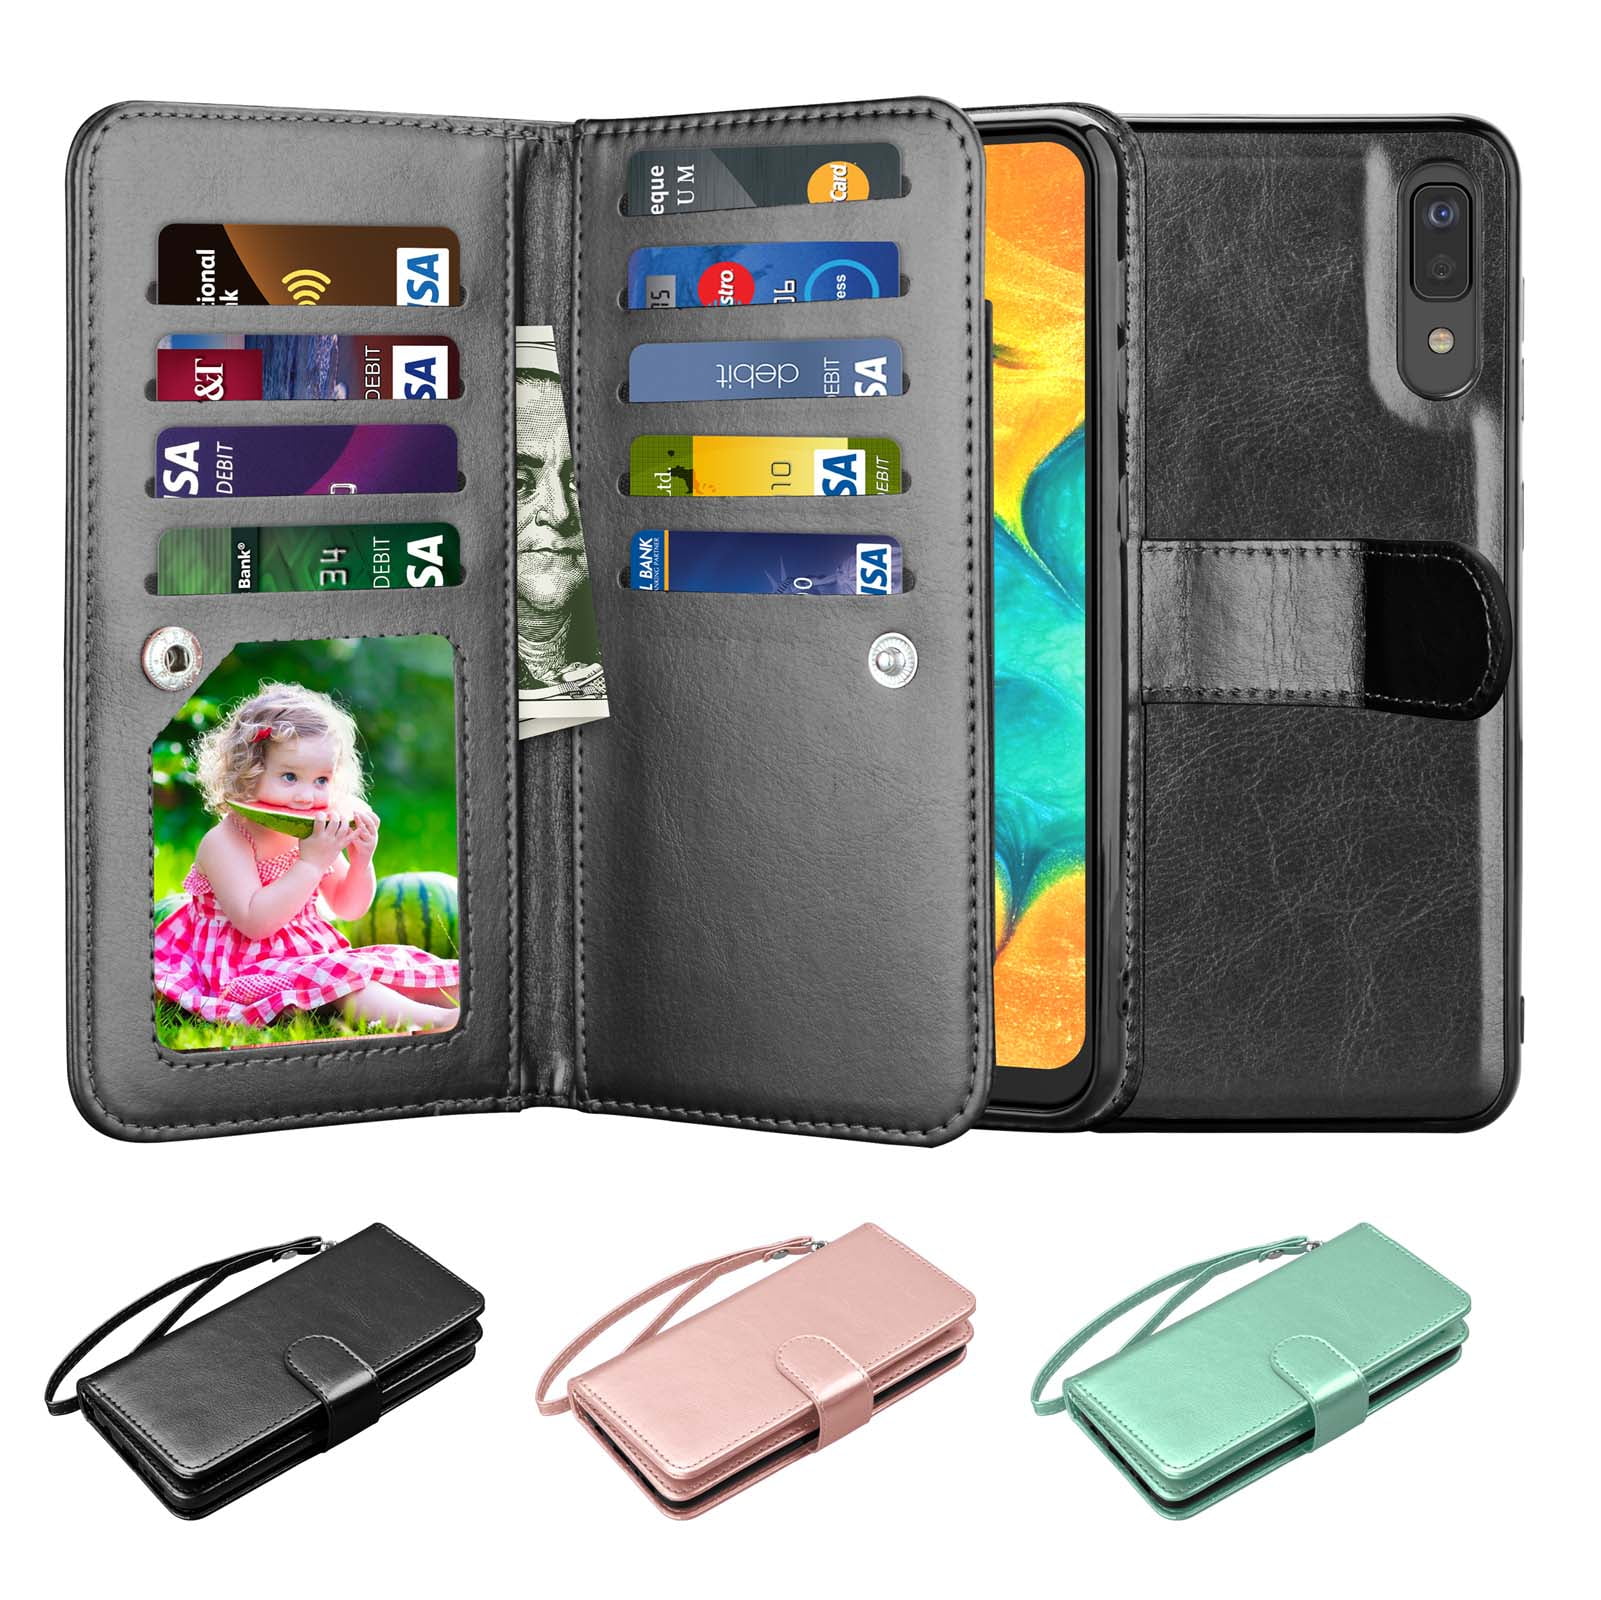 Galaxy A50 Case,Samsung A50 Case,Samsung Galaxy A50 Case with Card Holder Slot Wallet Leather Flip PU Phone Protective Case Cover for Samsung Galaxy A50 with Kickstand,Cute Butterfly Red 